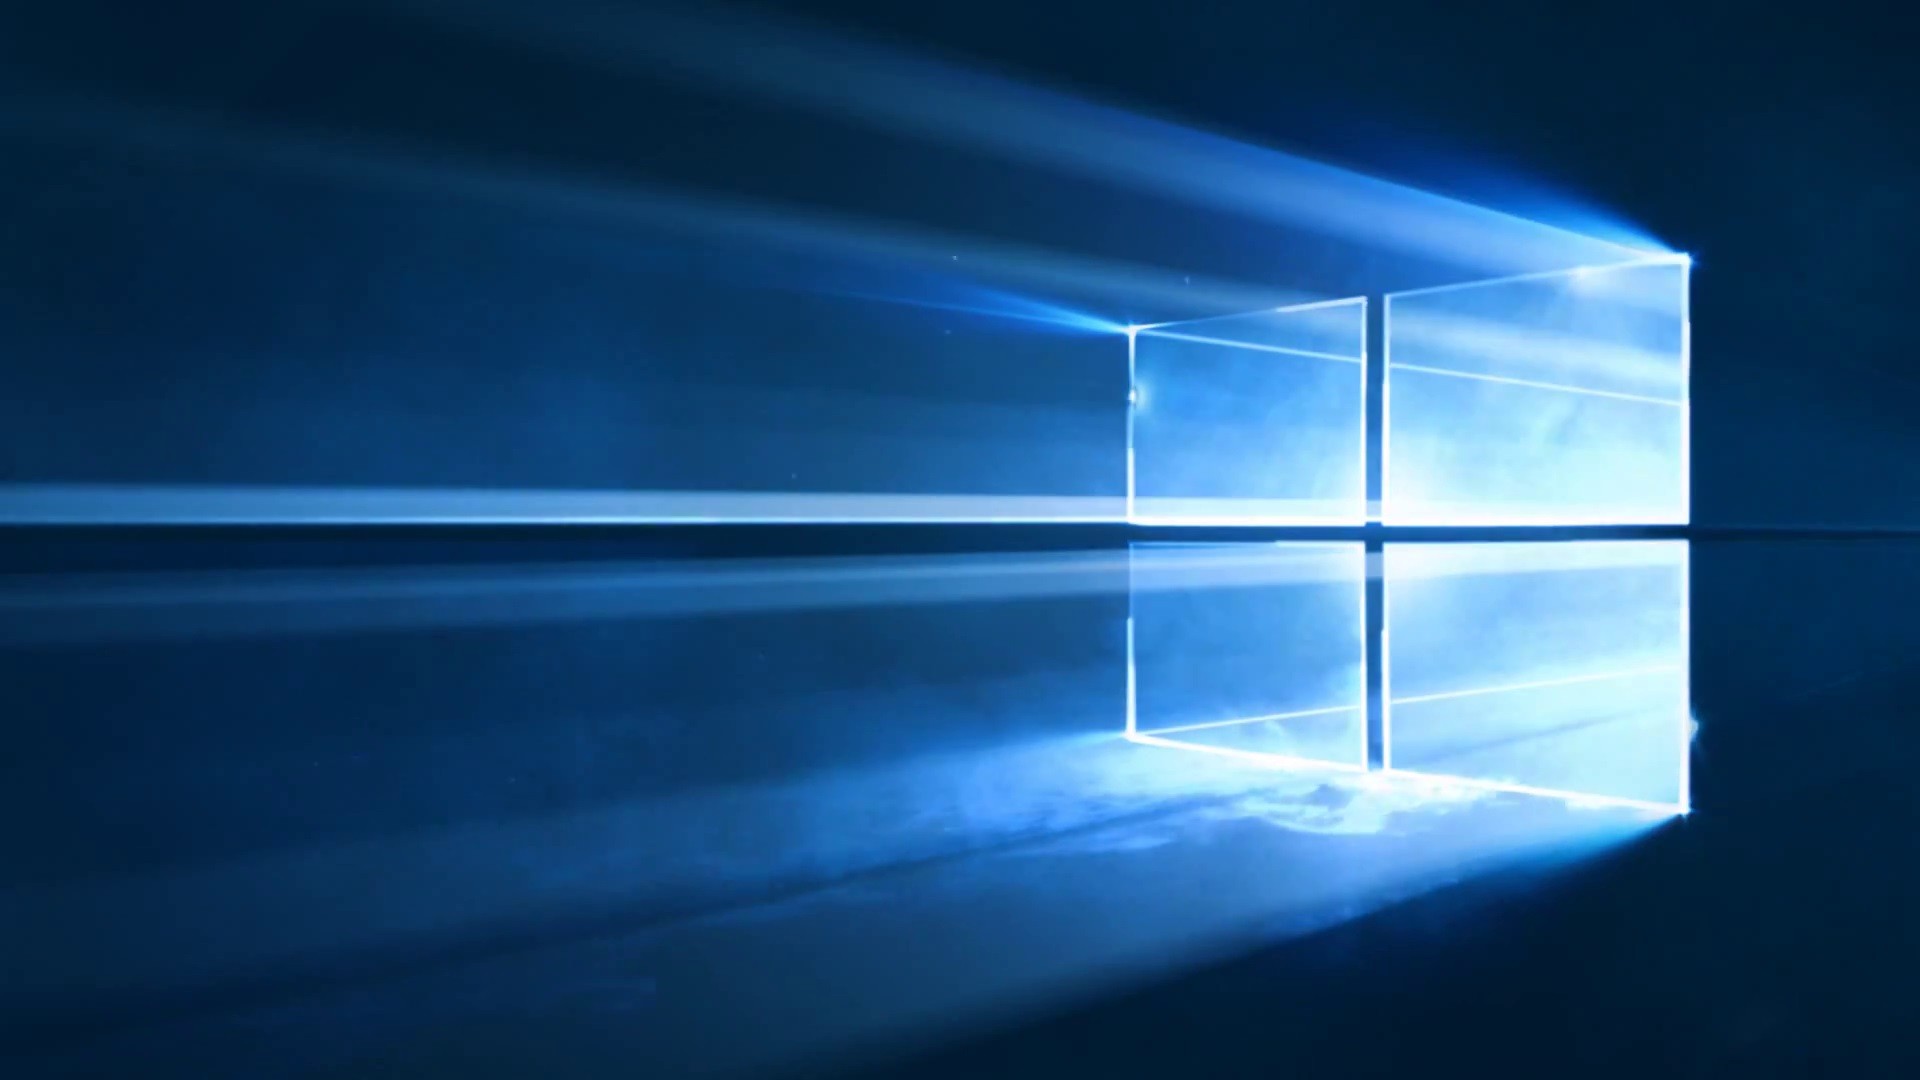 So This Is The New Default Wallpaper For Windows